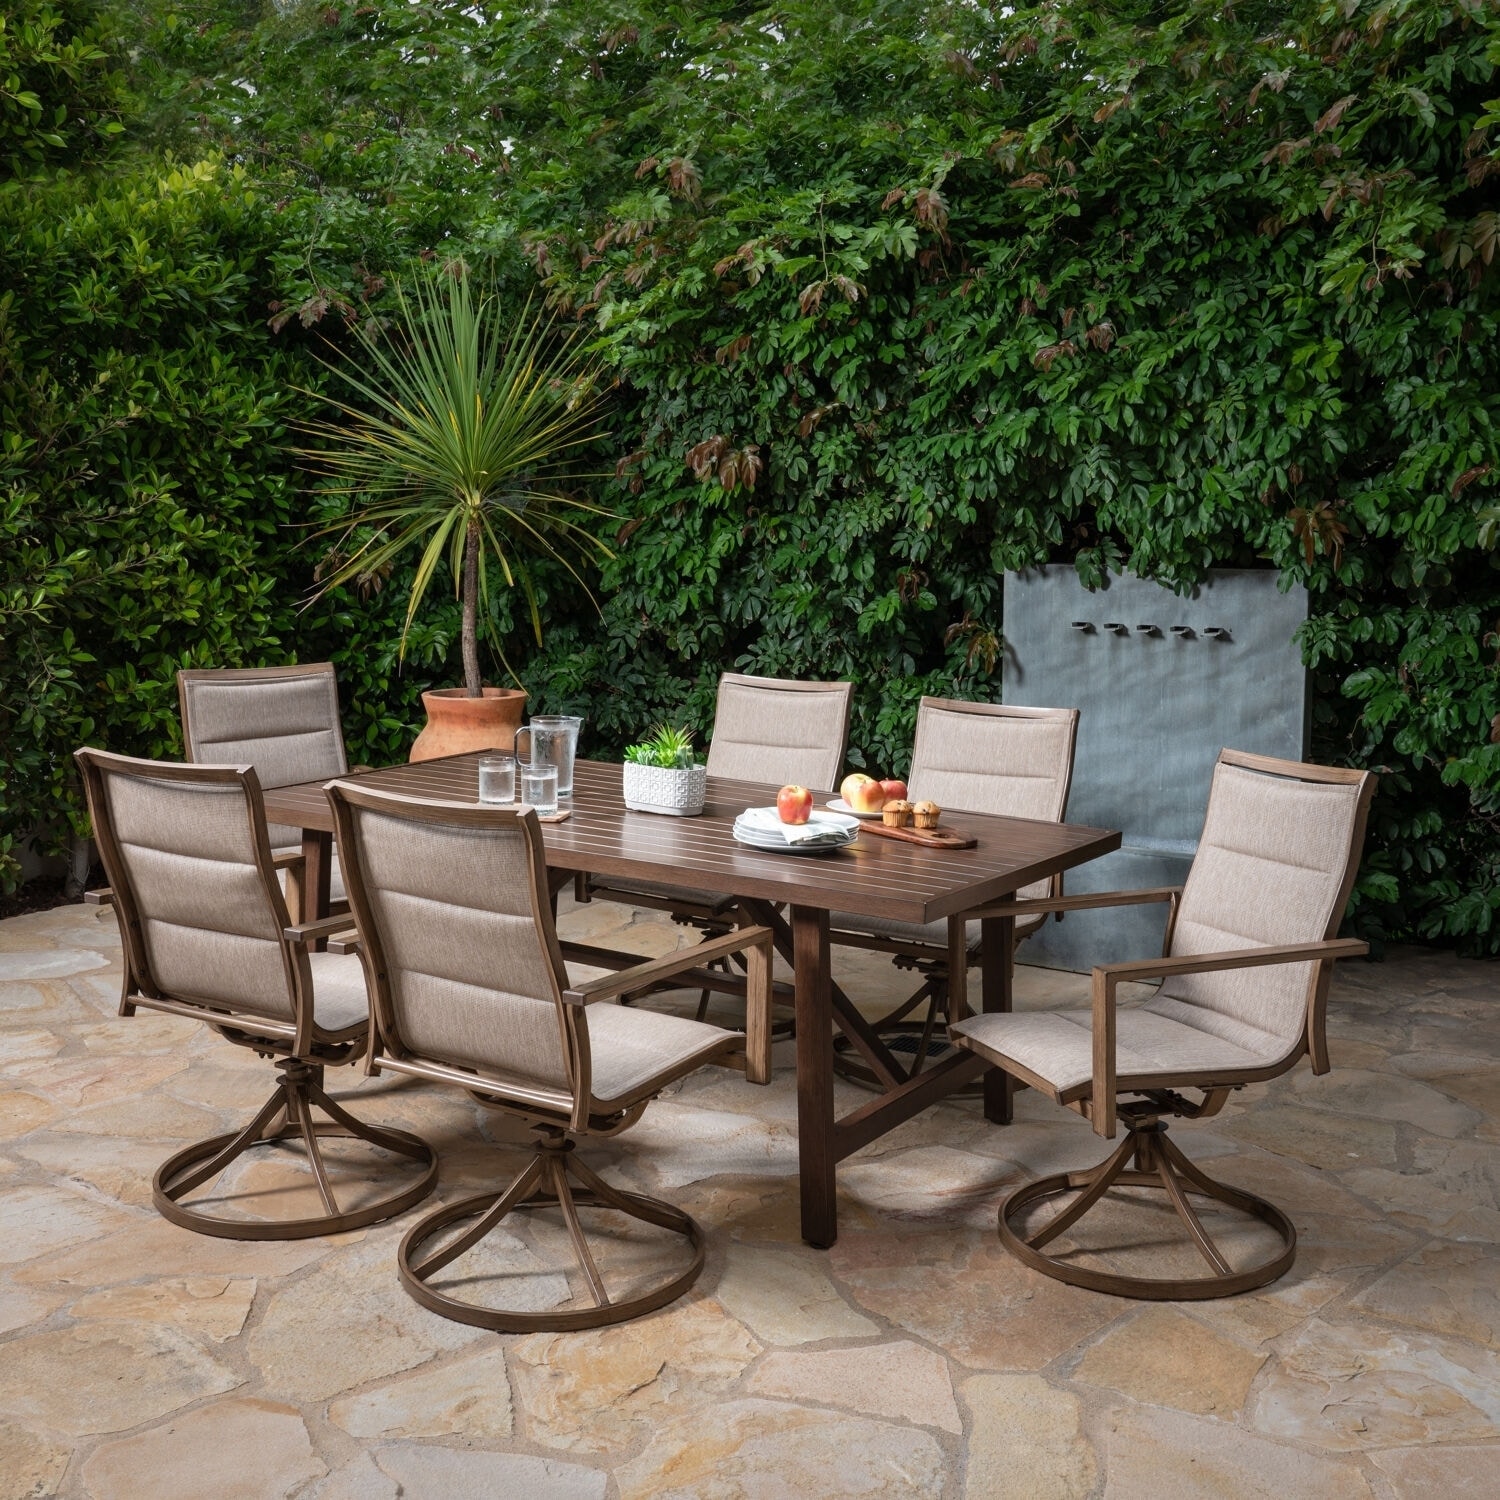 Hanover Fairhope 7-piece Outdoor Dining Set With 4 Sling Chairs  2 Sling Swivel Rockers And A 74-in. X 40-in. Trestle Table  Tan